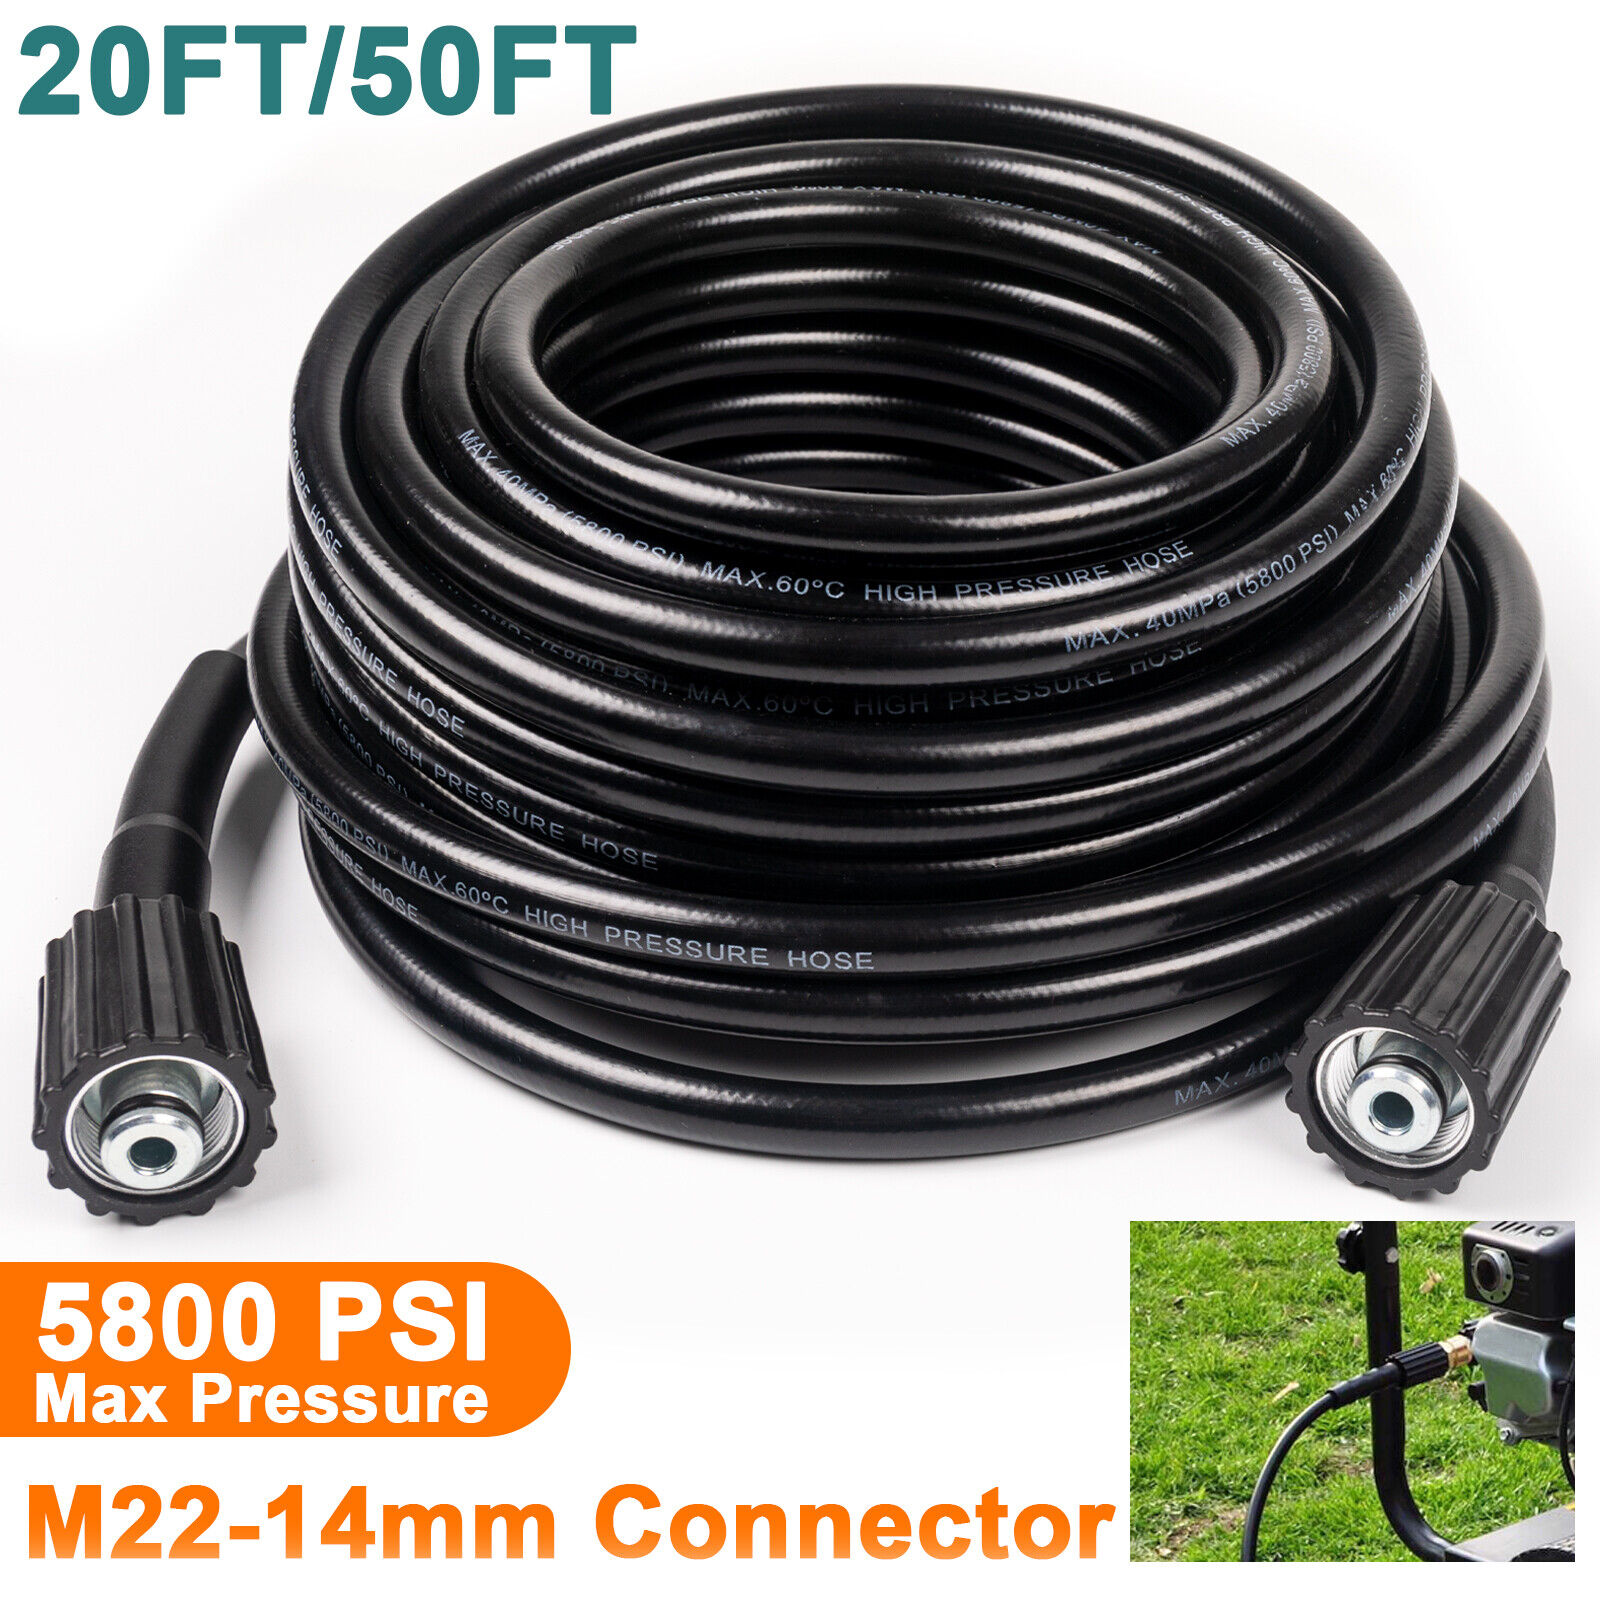 High Pressure Washer Hose 20/50ft 5800PSI M22-14mm Power Washer Extension Hose